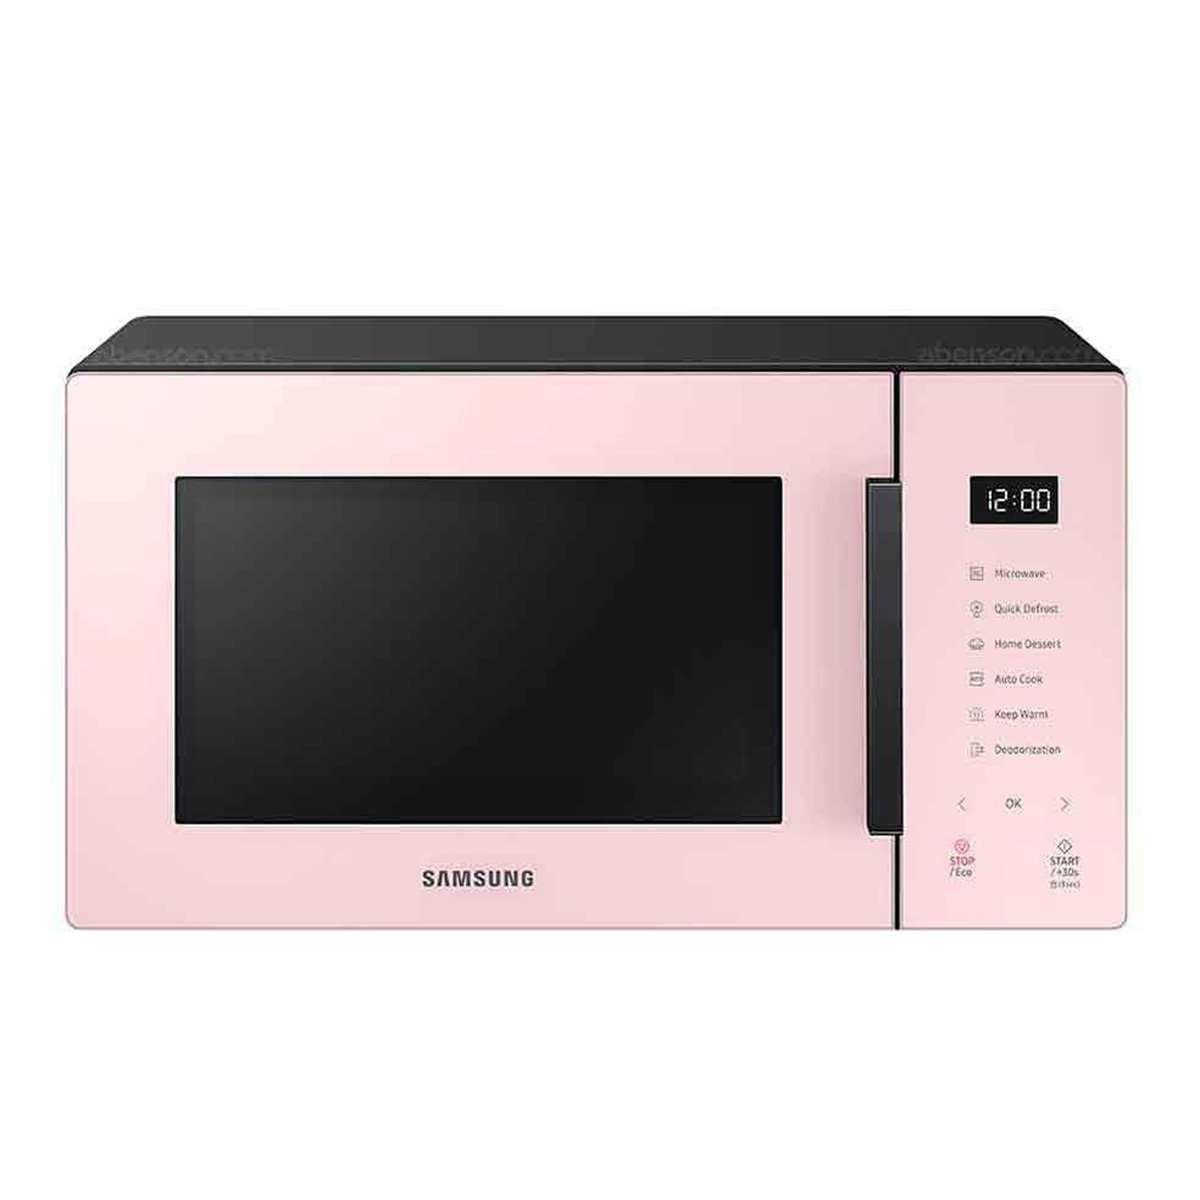 Samsung Bespoke Microwave Oven Solo with Deodorization, 23 L, Pink, MS23T5018AP/SG